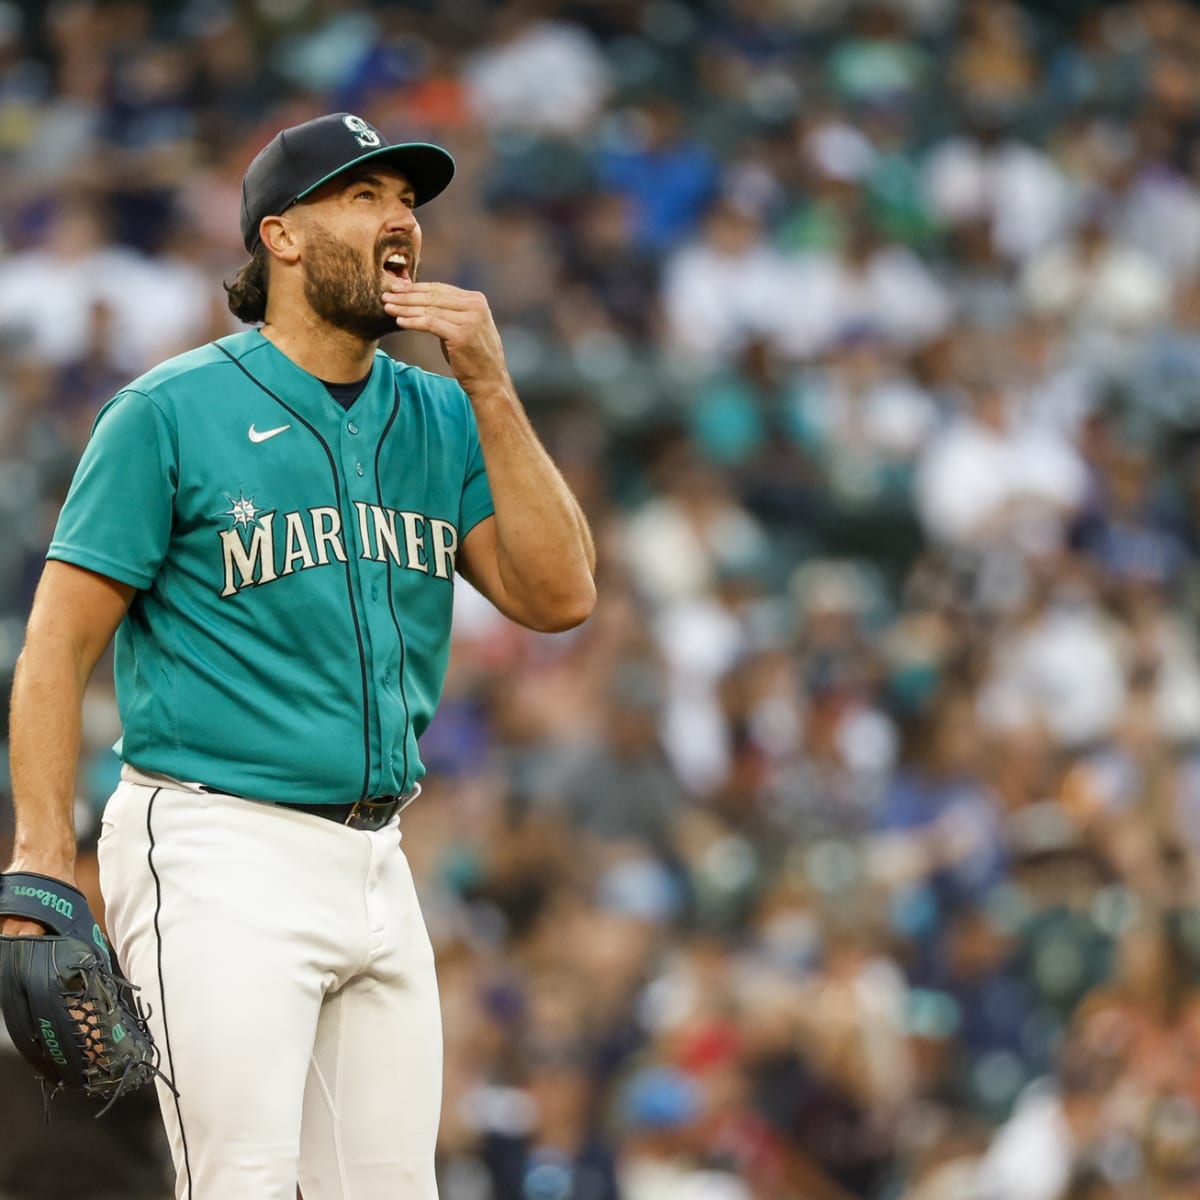 WATCH: Luke Weaver, Robbie Ray Both Ejected in National Anthem